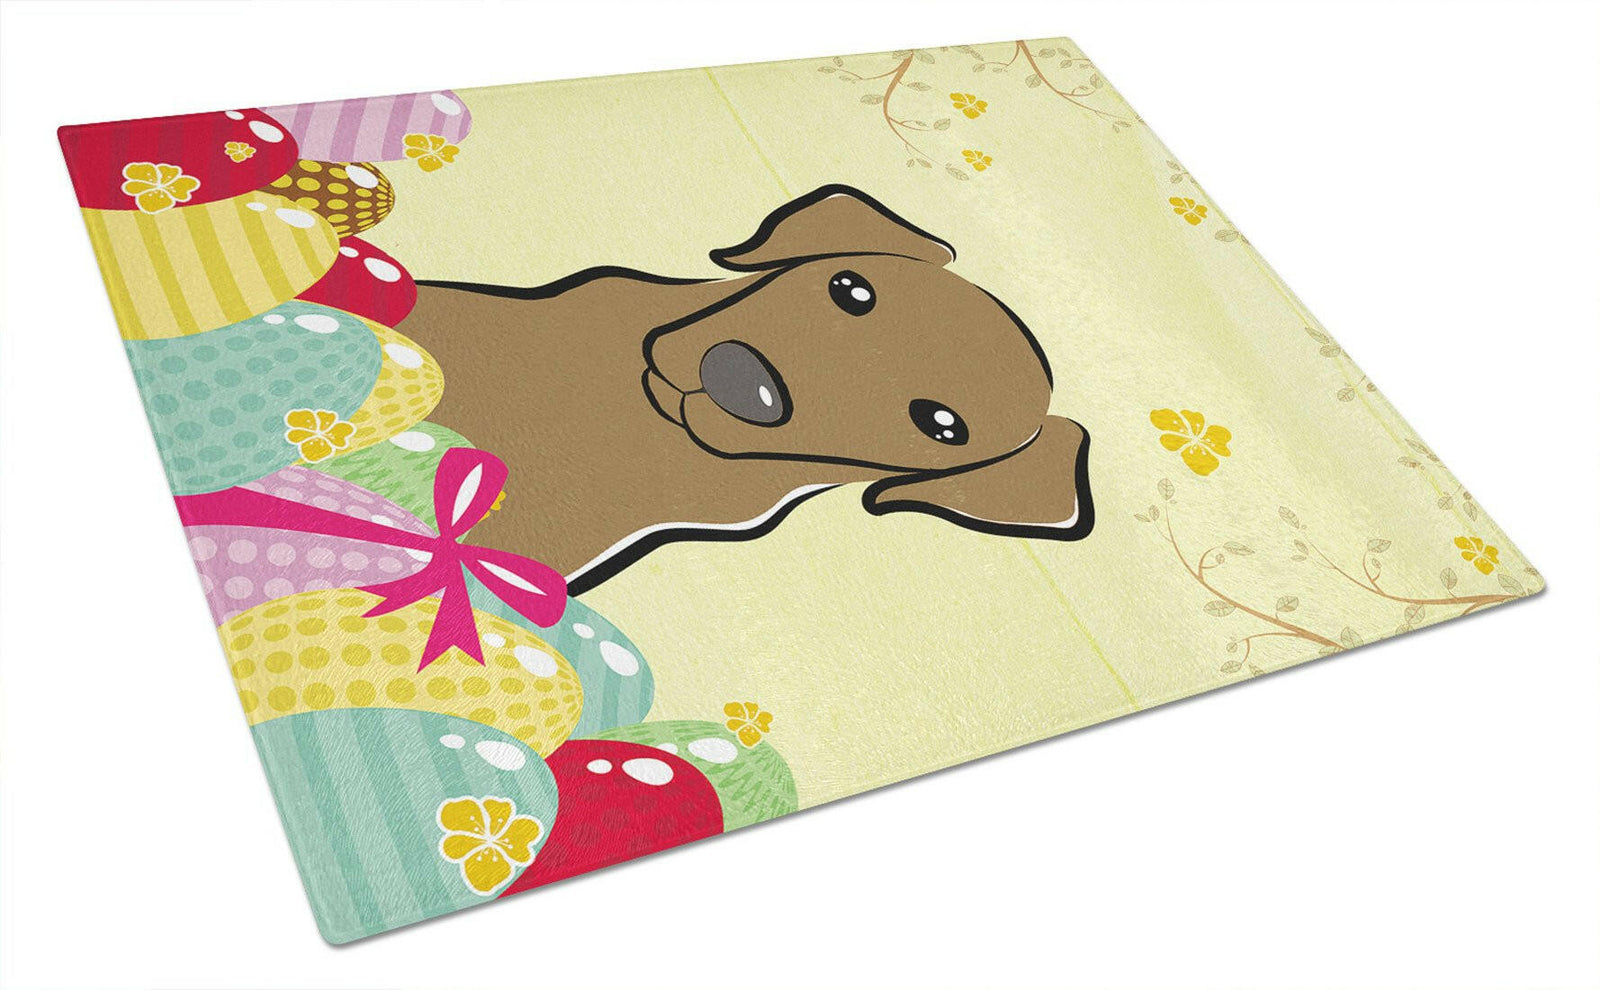 Chocolate Labrador Easter Egg Hunt Glass Cutting Board Large BB1916LCB by Caroline's Treasures